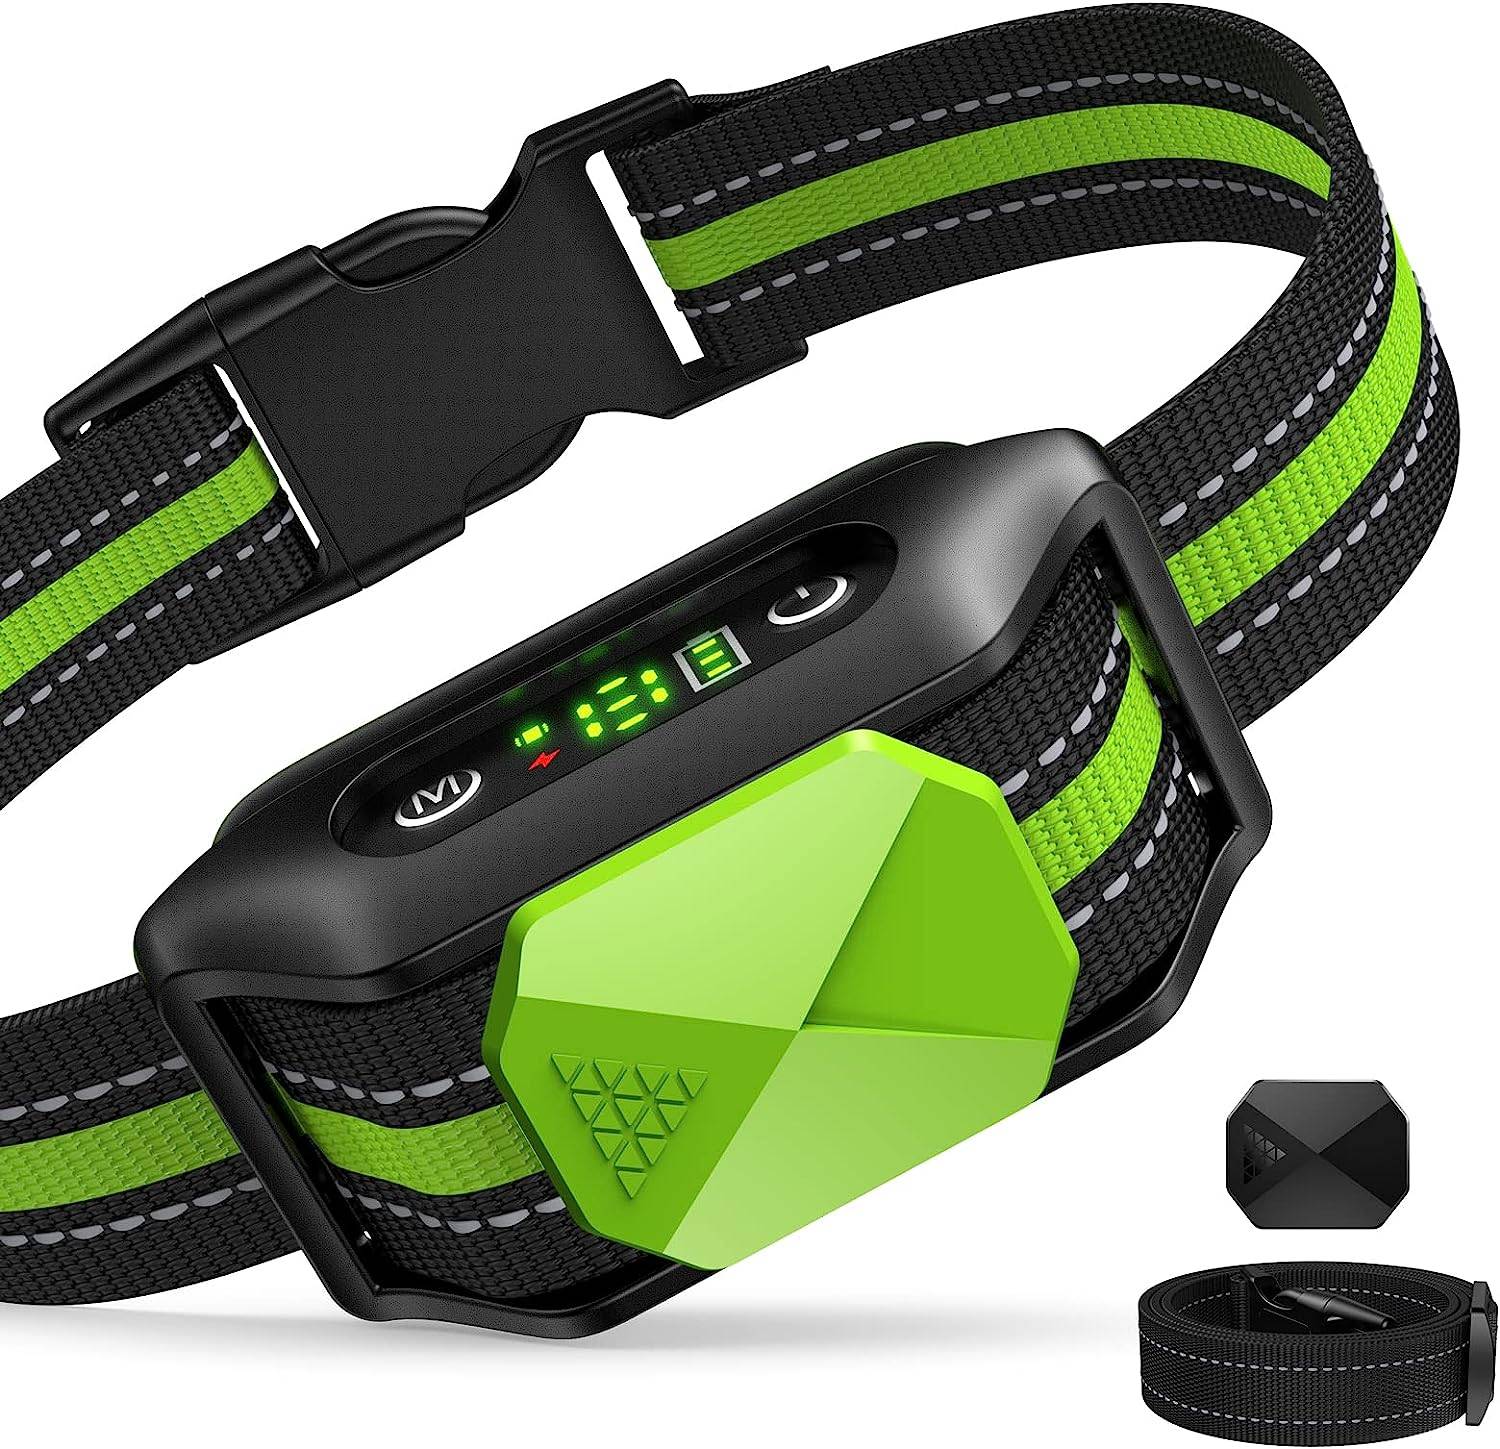 5 levels sensitivity adjustment, sound + vibration stop and anti-barking function.
The anti barking training shock Collar works in automatic mode, in which sounds and vibrations are combined to effectively and safely stop the barking. Useful when you are not at home and your dog stays alone.
Our rechargeable barking collar control device contains an integrated rechargeable battery, and can be fully charged in 2 hours for up to 15 days of work time. There are 3 green horizontal bars which shows the battery volume, easy to remind you to charge.
The bark collar is adjustable for dogs weighing 6 to 150 lbs with a neck size of 23.6 inches Max. Adjust the strap according to the size of your dog.